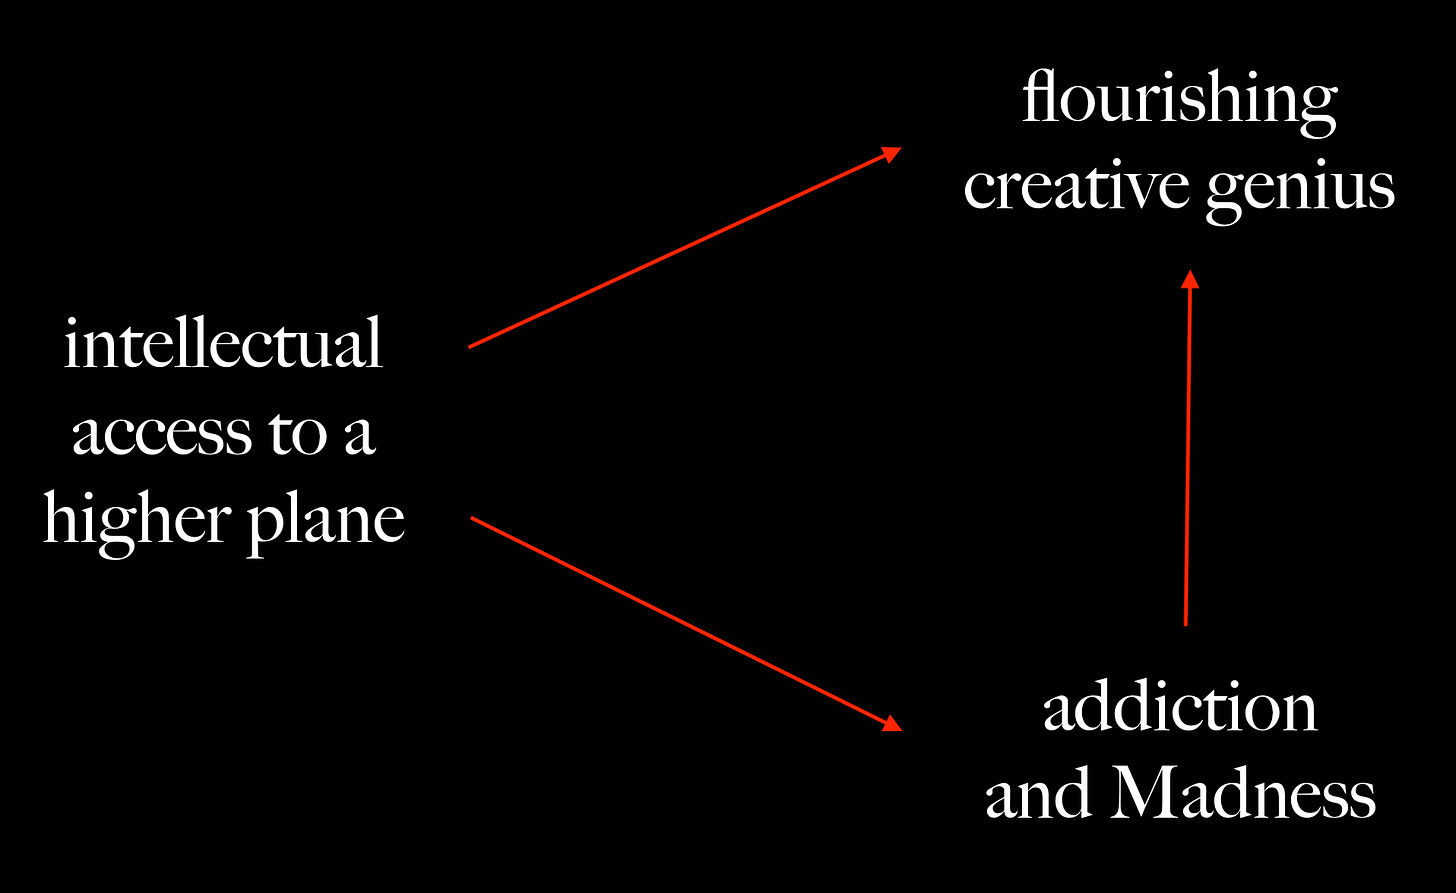 Same diagram, but with an arrow added going from "addiction and Madness" to "creative genius."